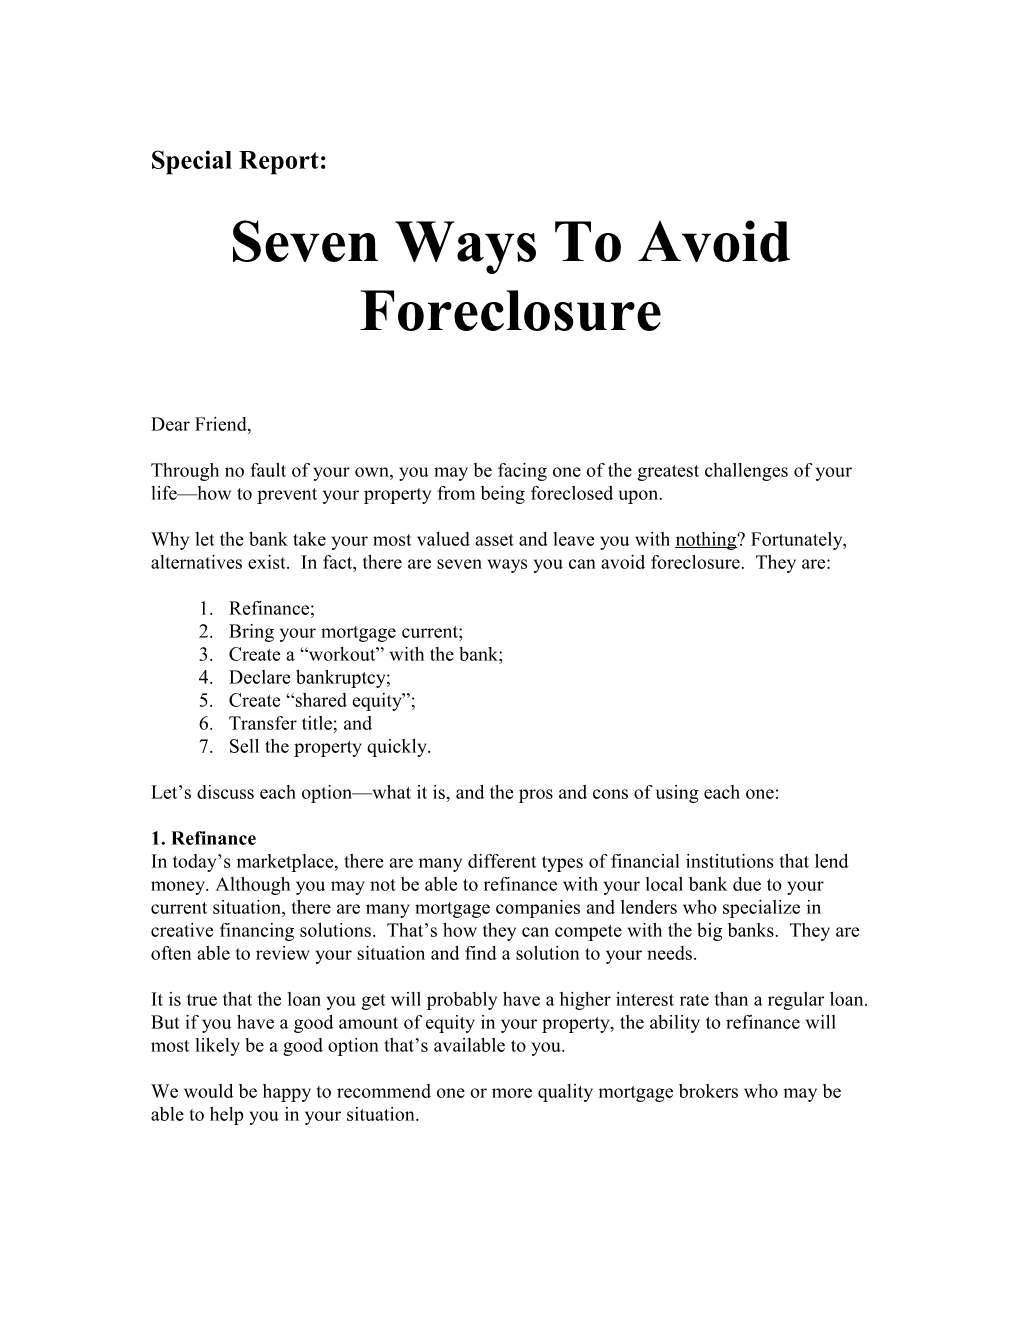 Special Report: Seven Ways to Avoid Foreclosure